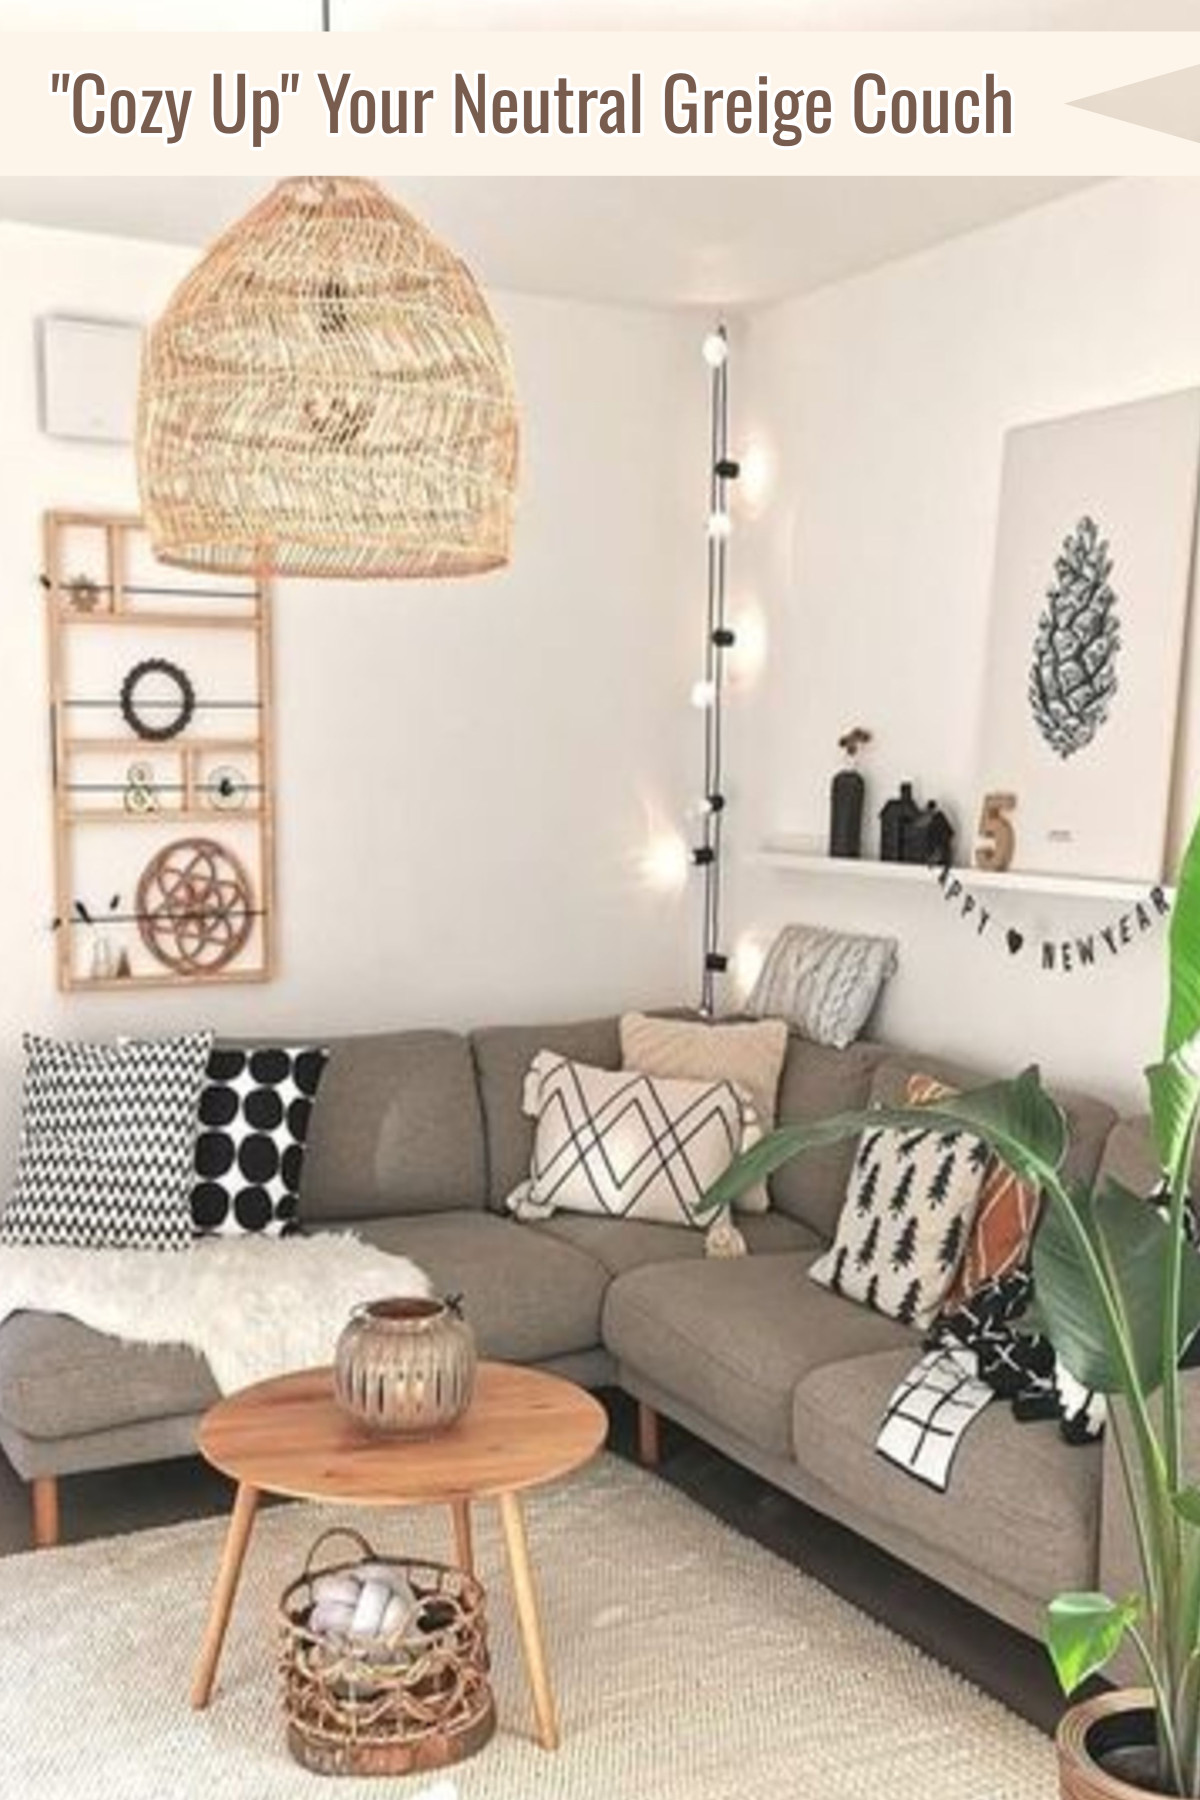 Cozy Up Your Neutral Greige Couch